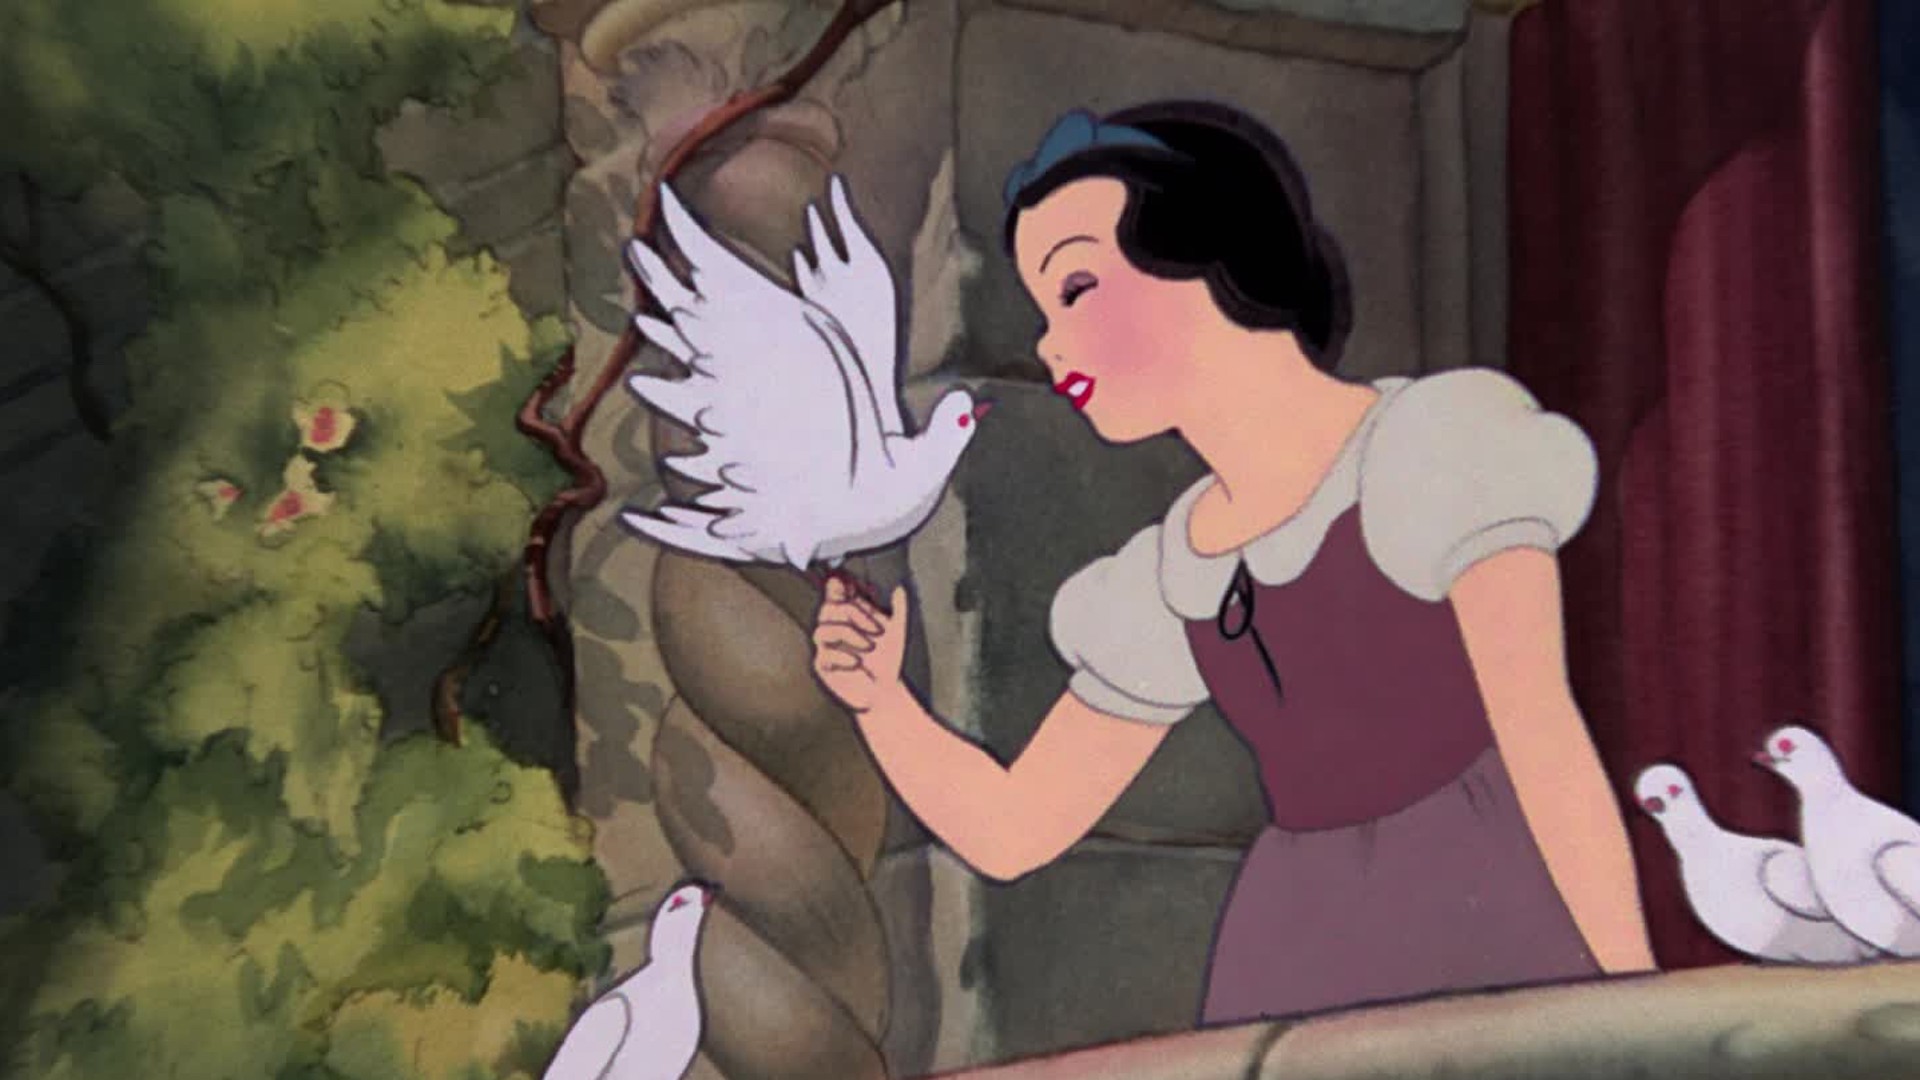 A scene from Snow White 